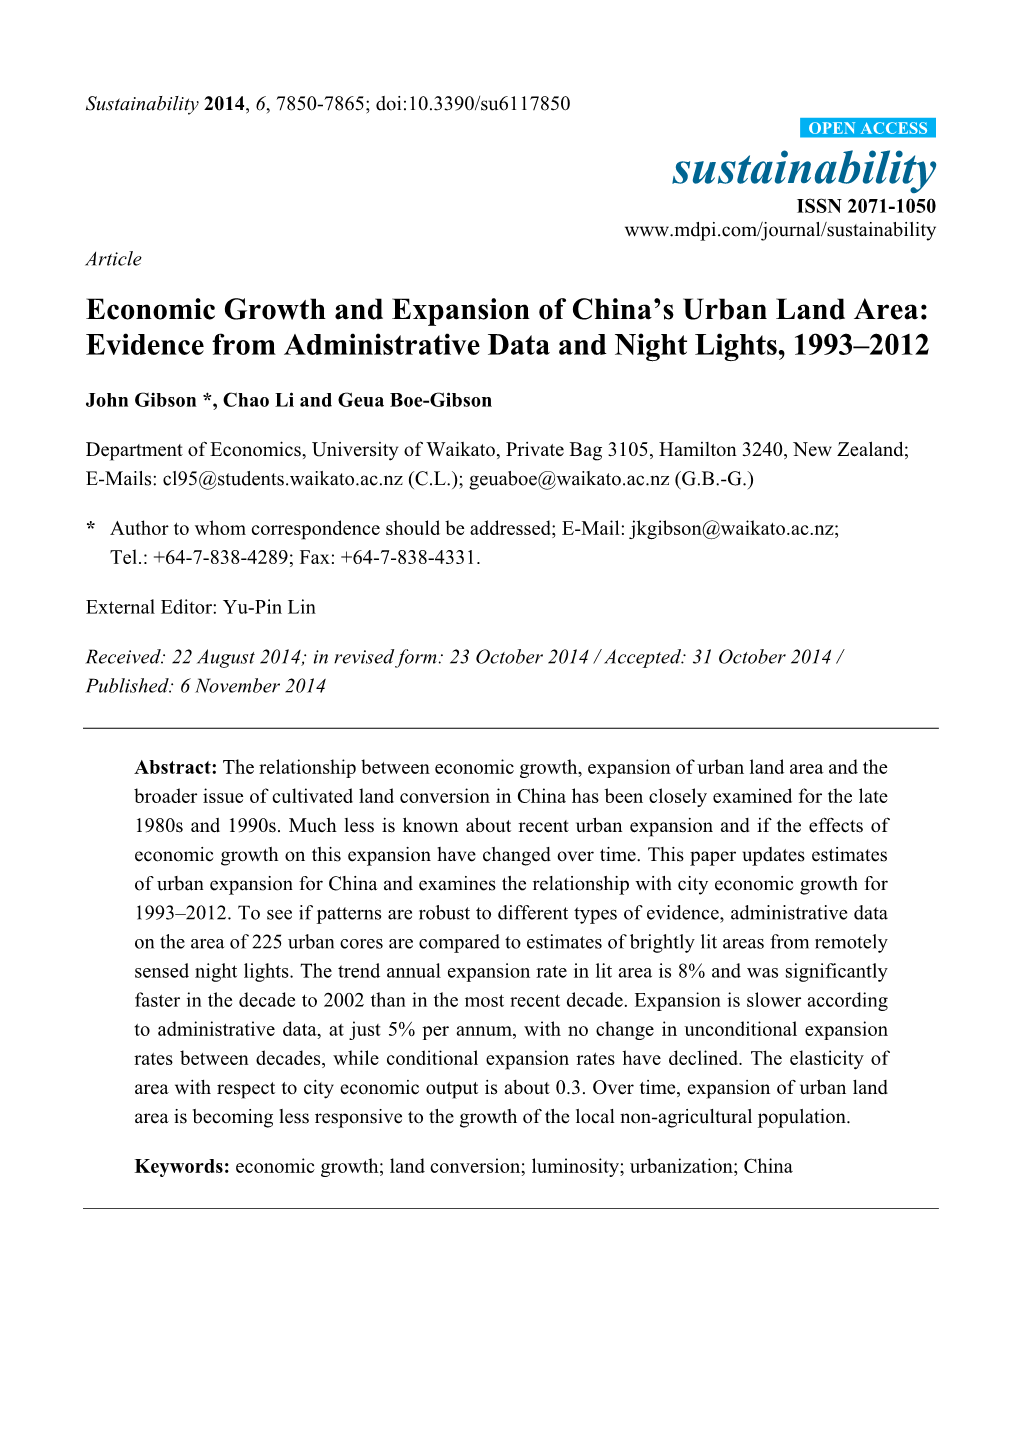 Economic Growth and Expansion of China's Urban Land Area